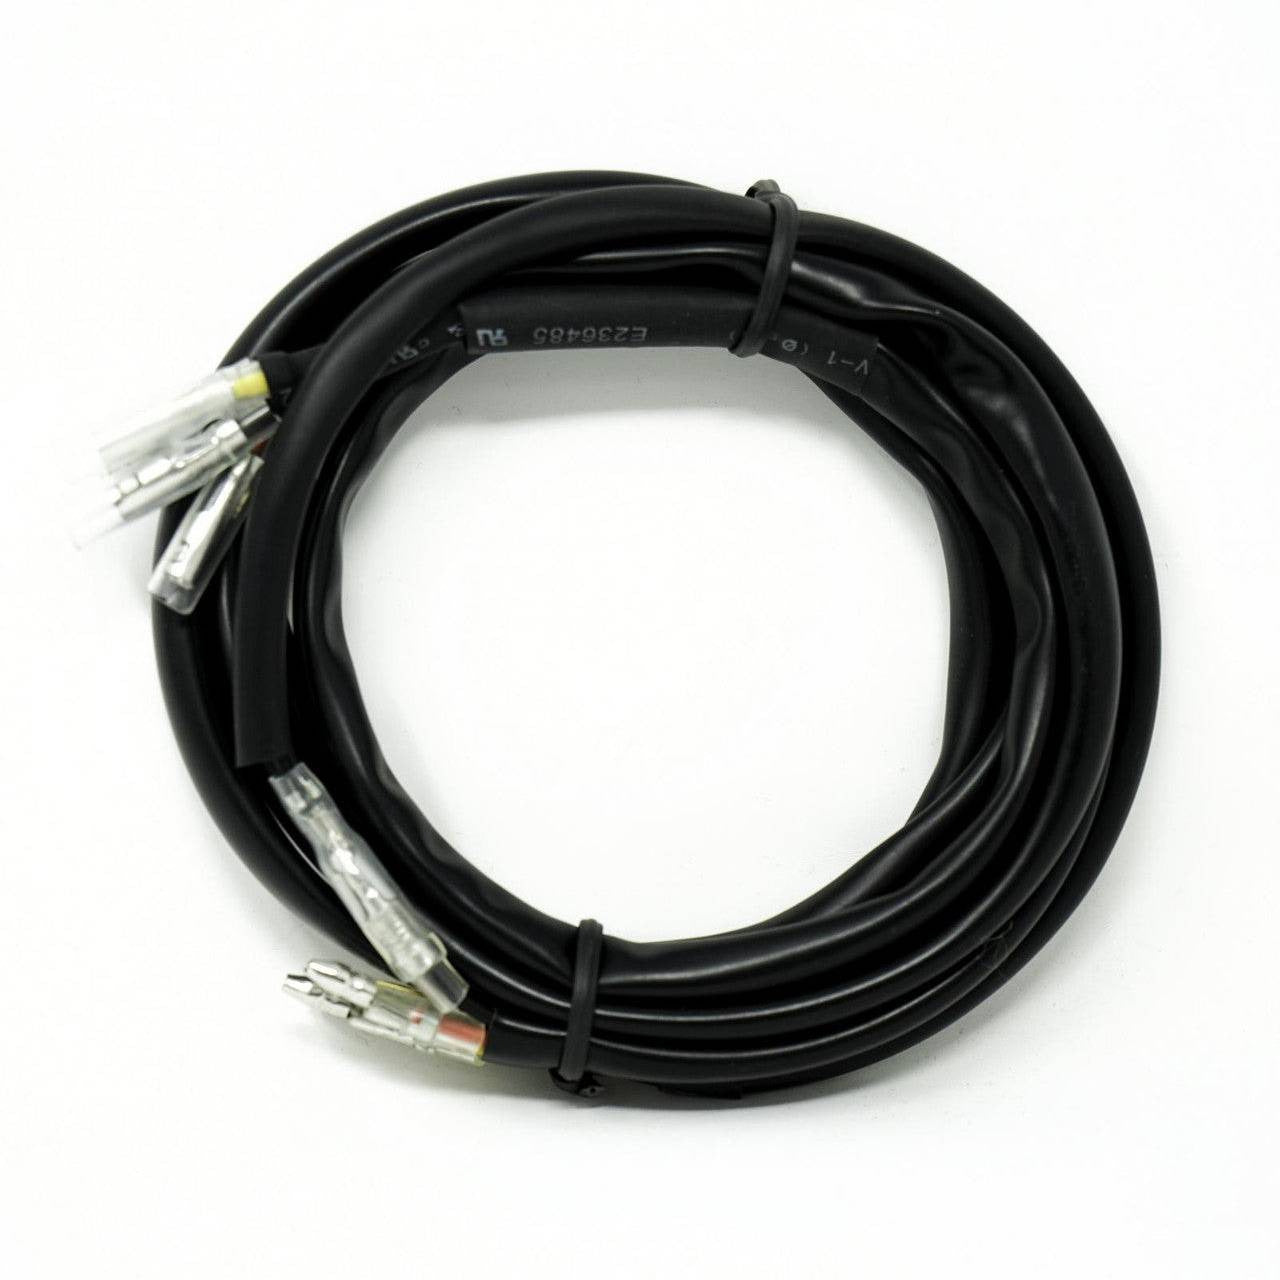 RTL-M License Plate Wiring Harness